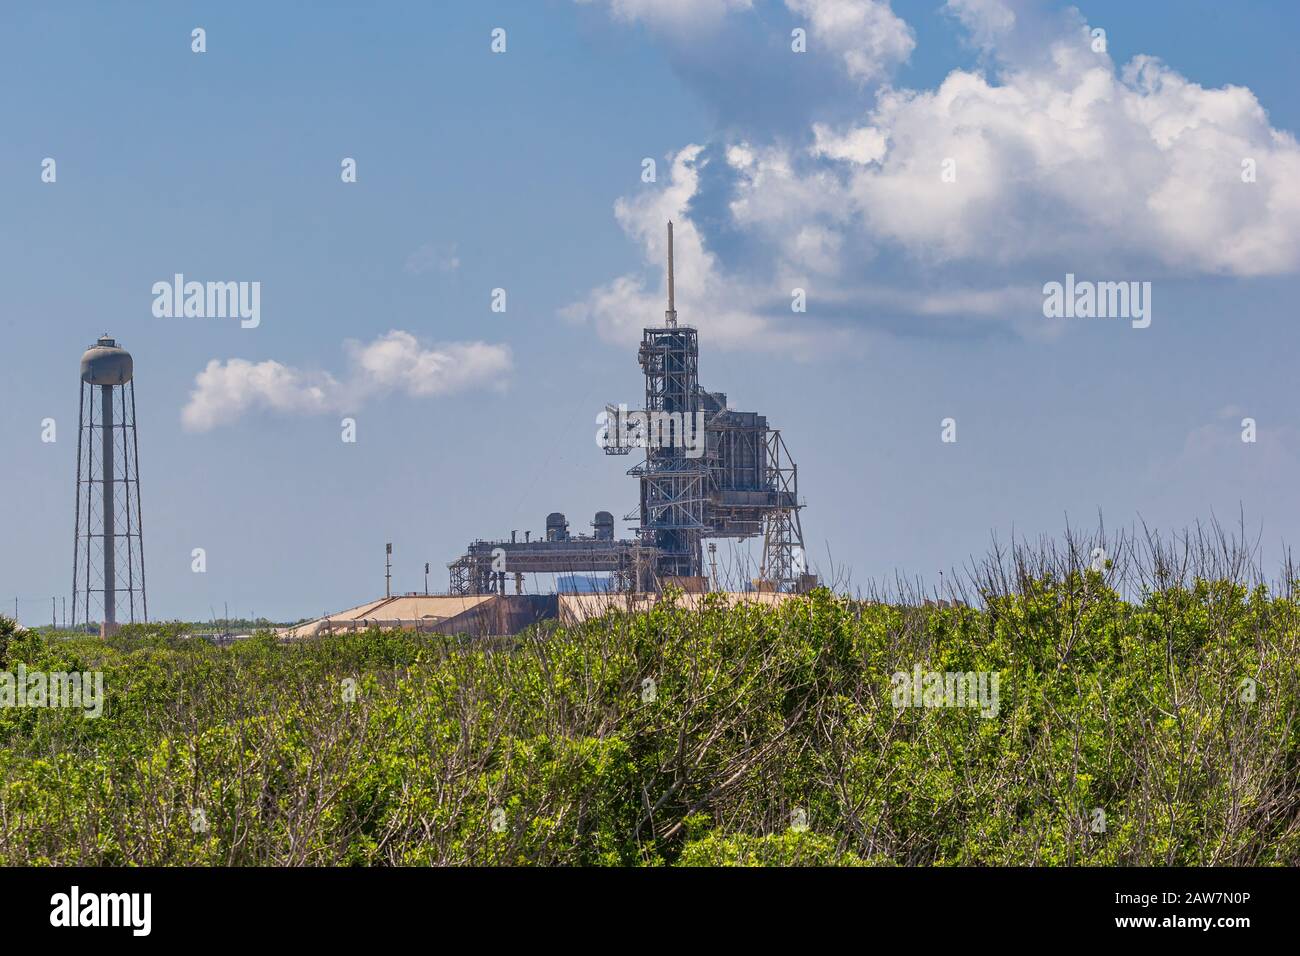 Kennedy Space Center, FL, USA - December 2, 2009: Space Shuttle Launch site LC-39B at Kennedy Space Center before it has been dismantled in 2011 Stock Photo